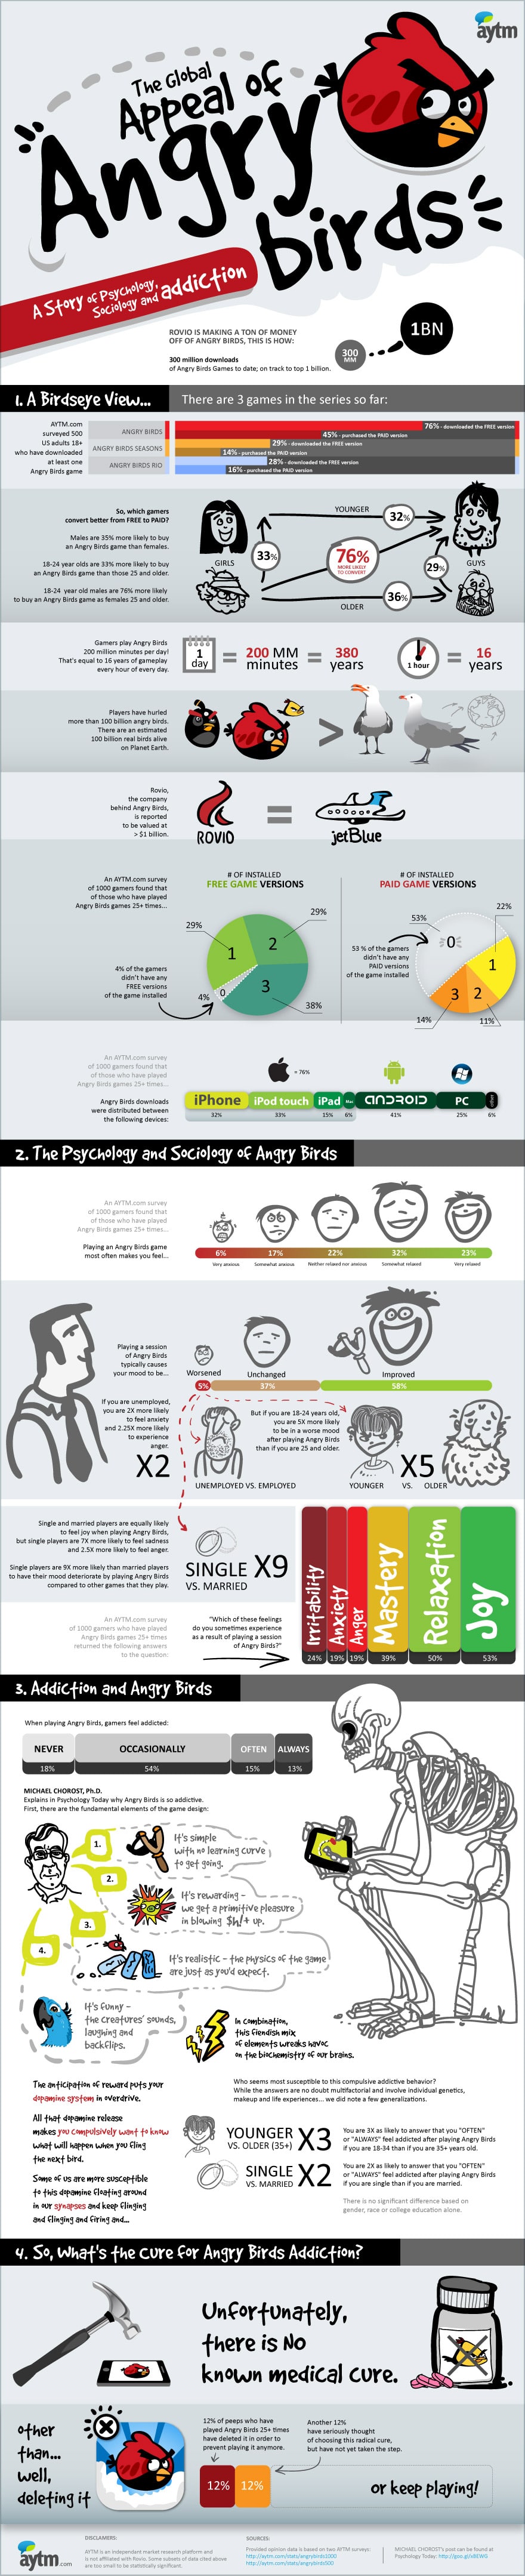 Angry Birds Addictiong Explanation Infographic